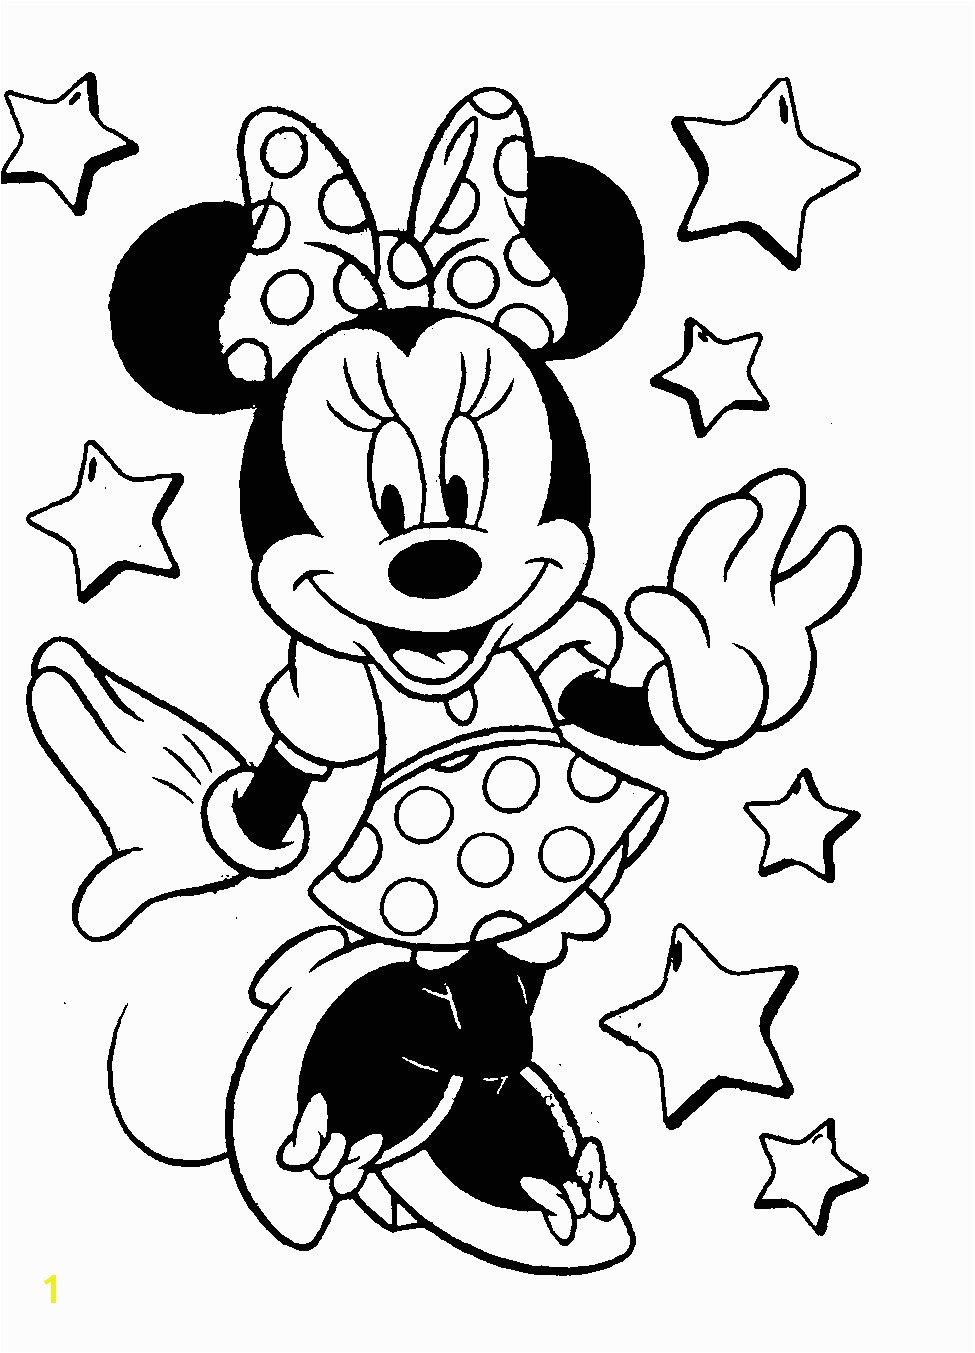 Disney Printable Coloring Pages Free Disney Coloring Pages All In One Place Much Faster Than